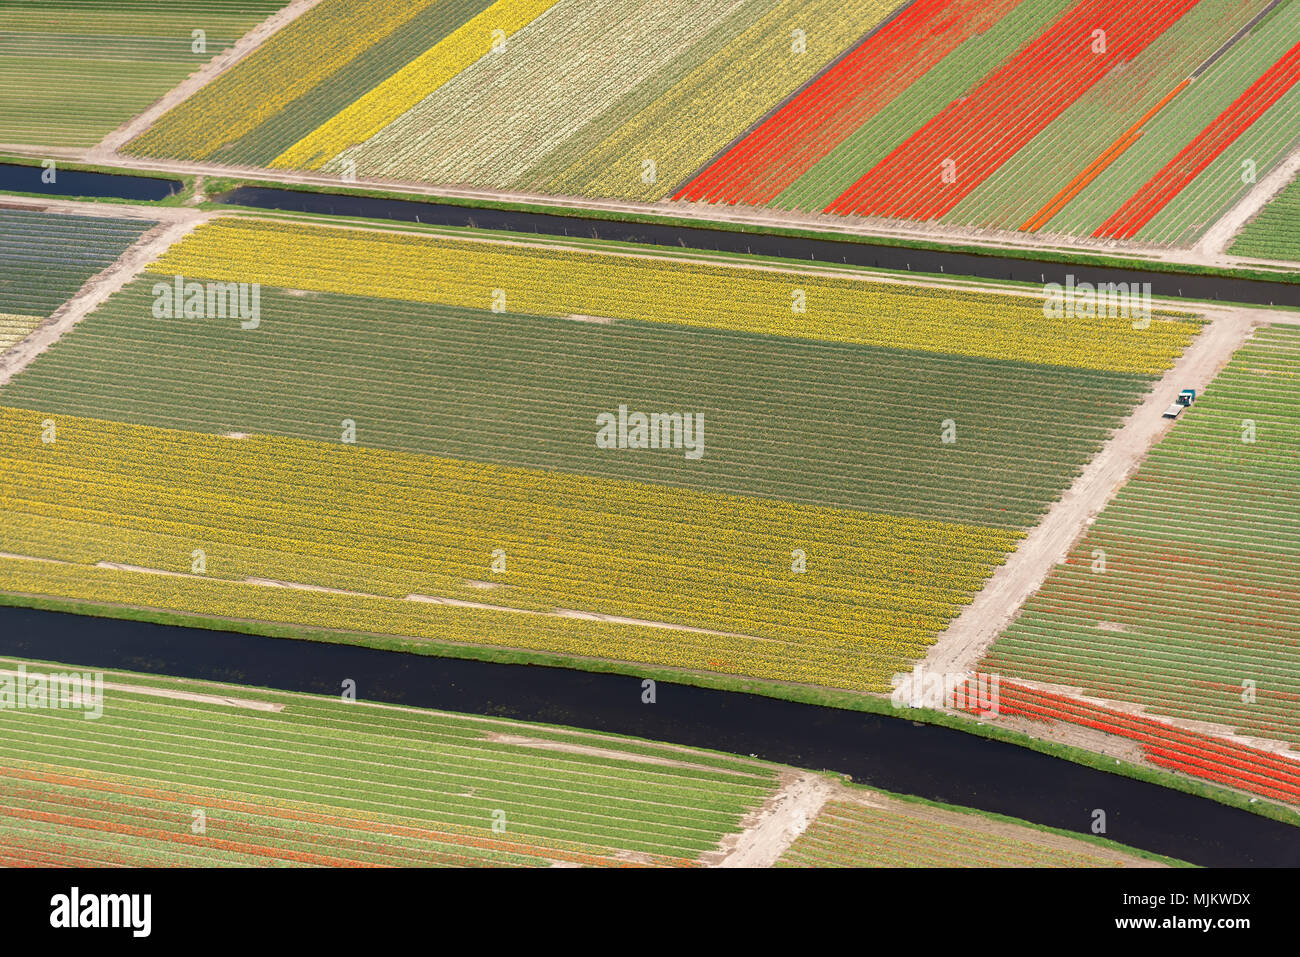 aerial view of tulips in a flower bulb field in Netherlands Stock Photo